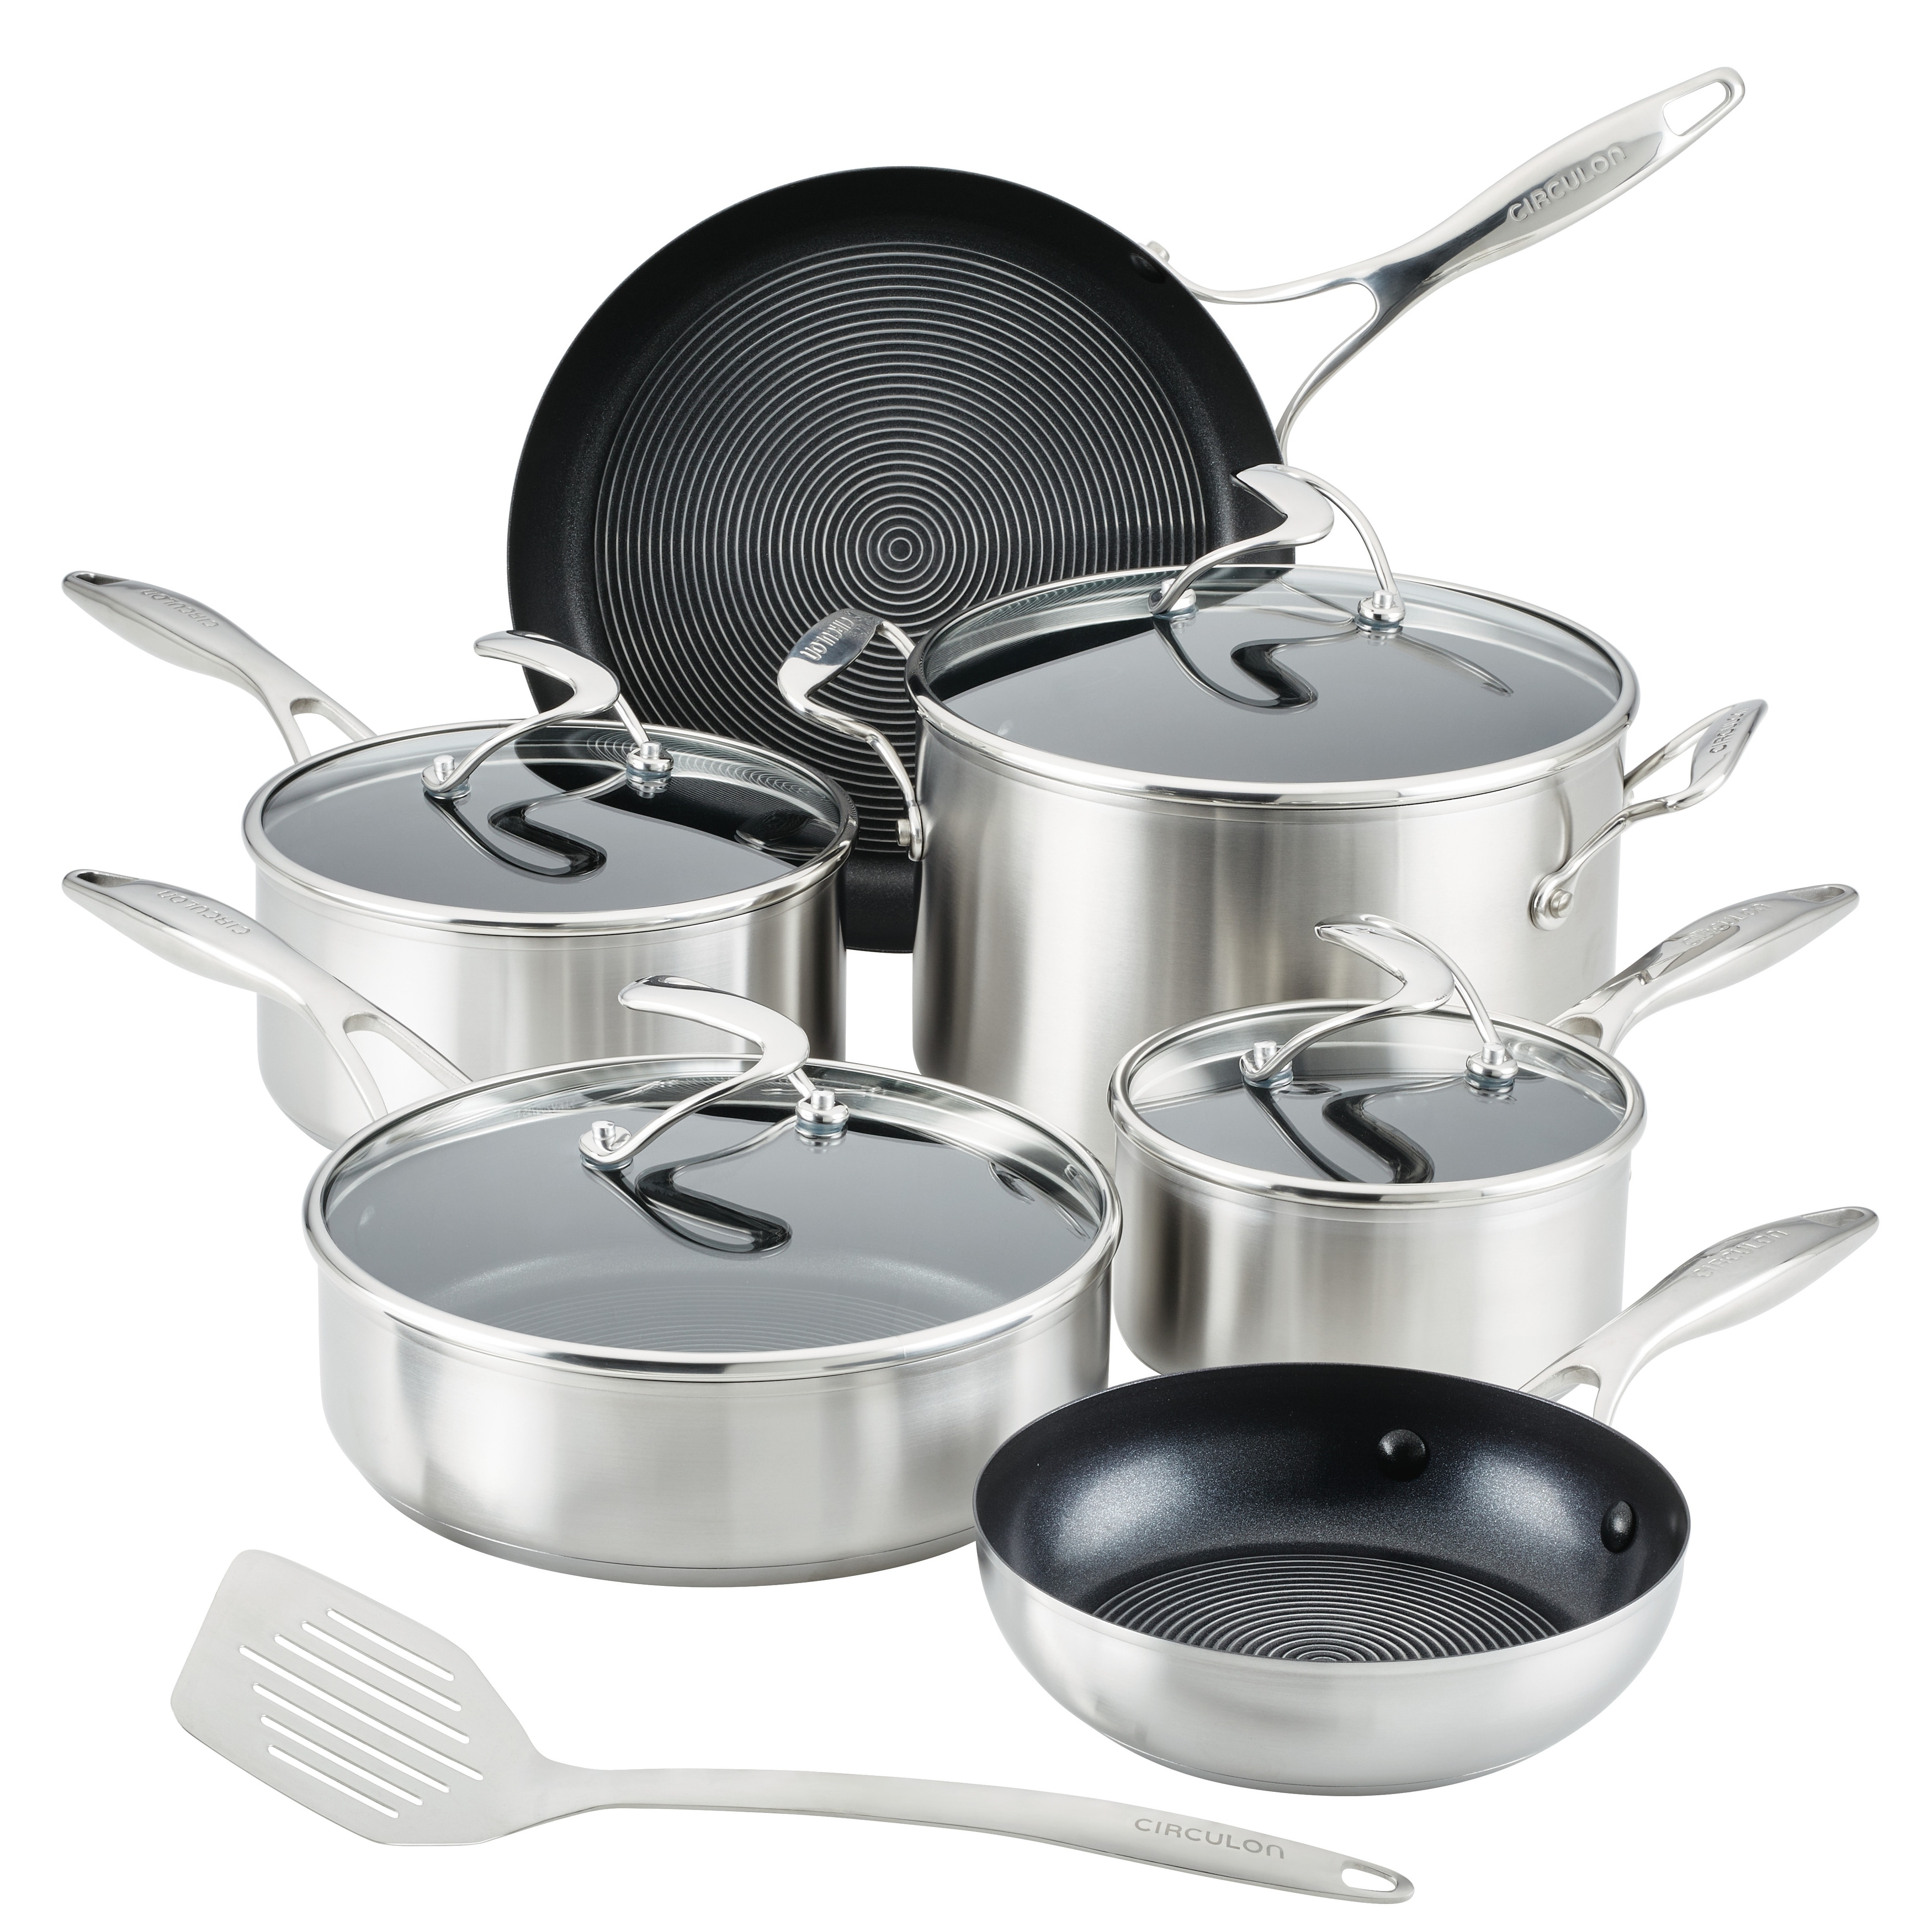 https://ak1.ostkcdn.com/images/products/is/images/direct/a325d6ecf697df584cd037474478ff41b3fdab75/Circulon-Stainless-Steel-Induction-Cookware-Set-with-SteelShield-Hybrid-Stainless-and-Nonstick-Technology%2C-11-piece%2C-Silver.jpg